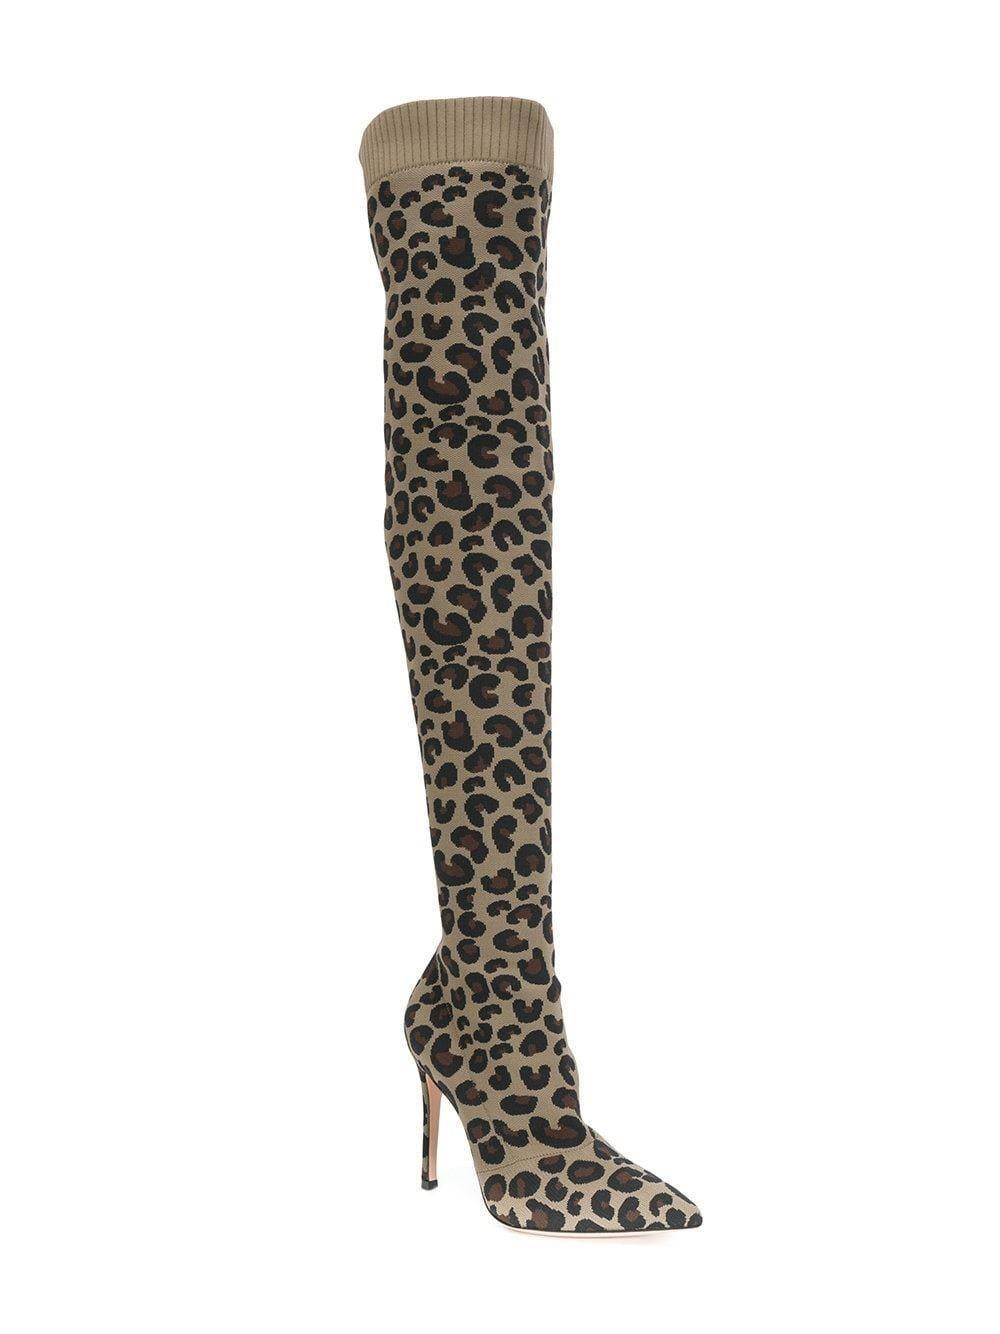 Set an evocative tone while wearing Gianvito Rossi's Sauvage over-the-knee boots. The knitted upper comes with stretch for a form-hugging silhouette, while the exotic leopard print and classic stiletto heel add a provocative note. Upper: fabric.